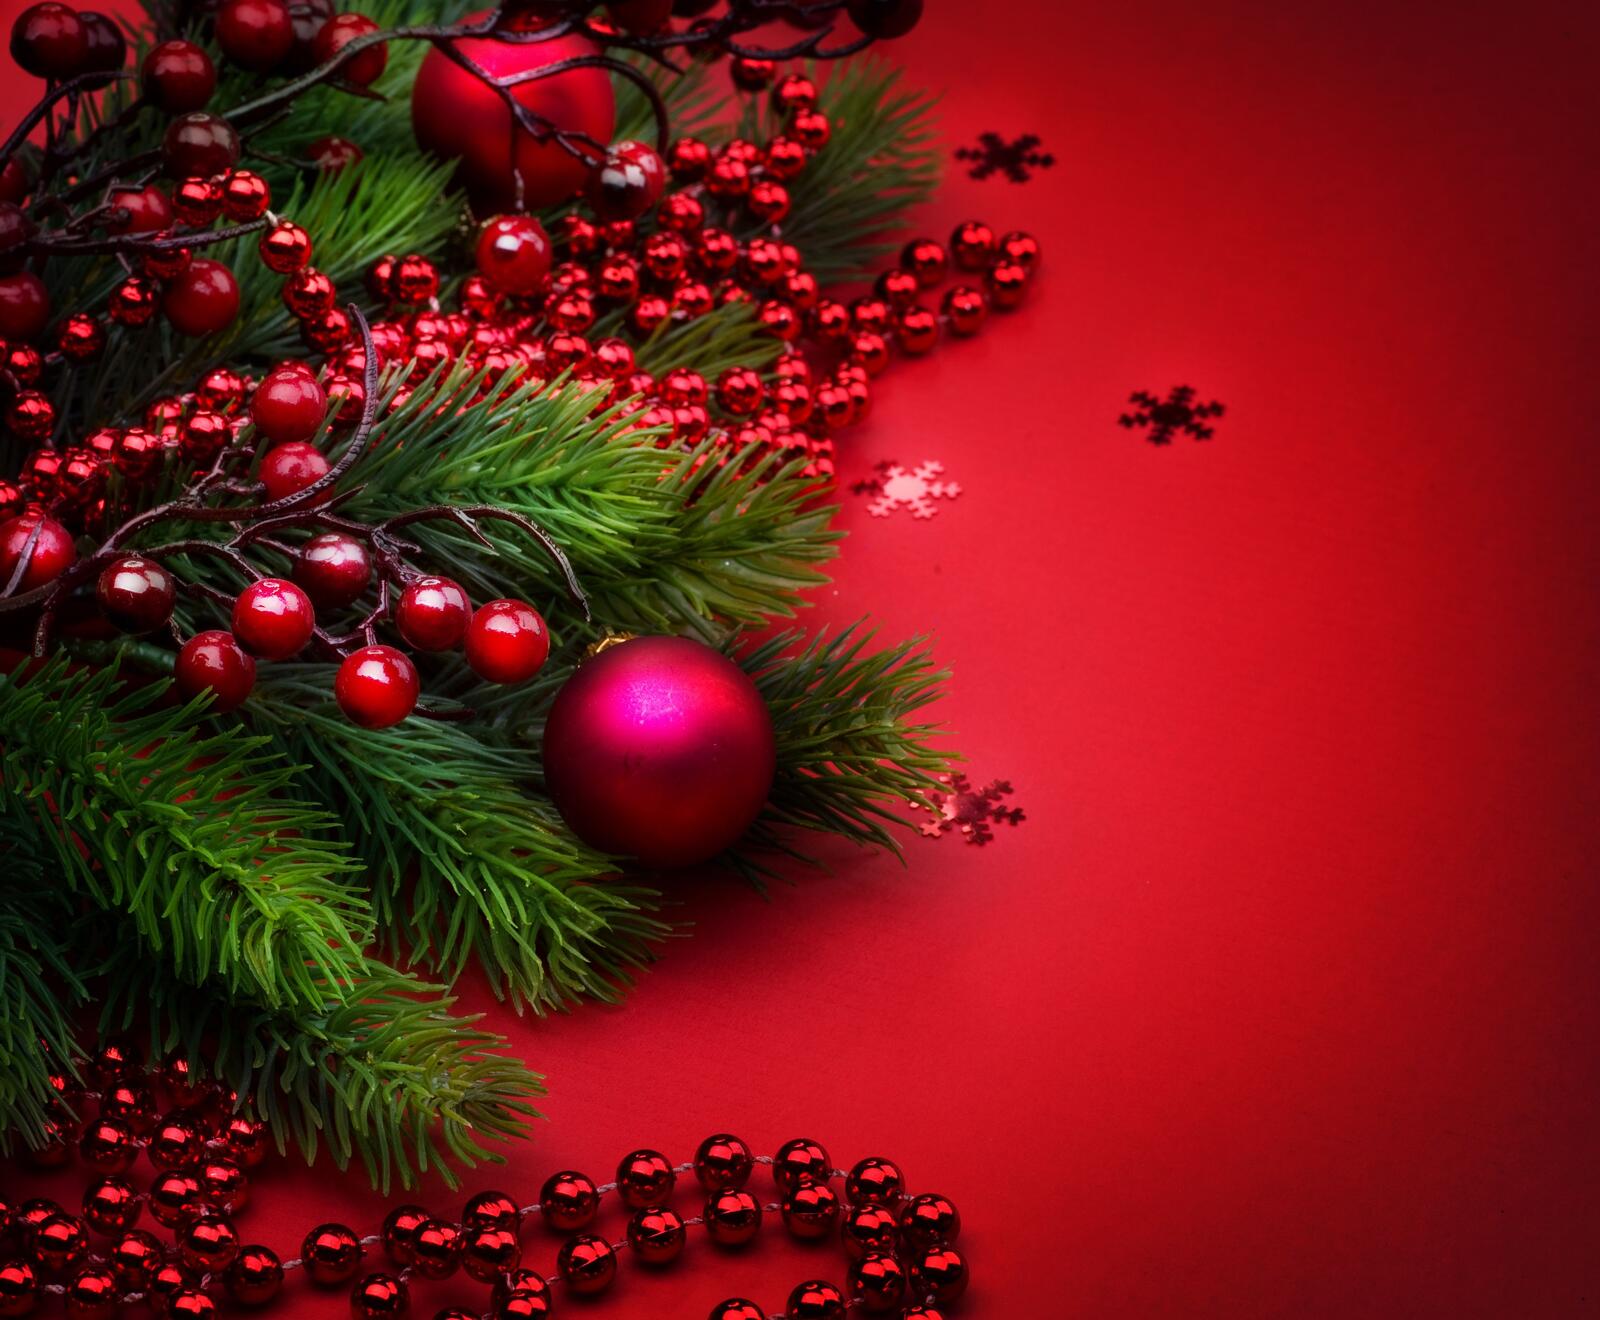 Wallpapers Christmas decorations New Year Christmas on the desktop